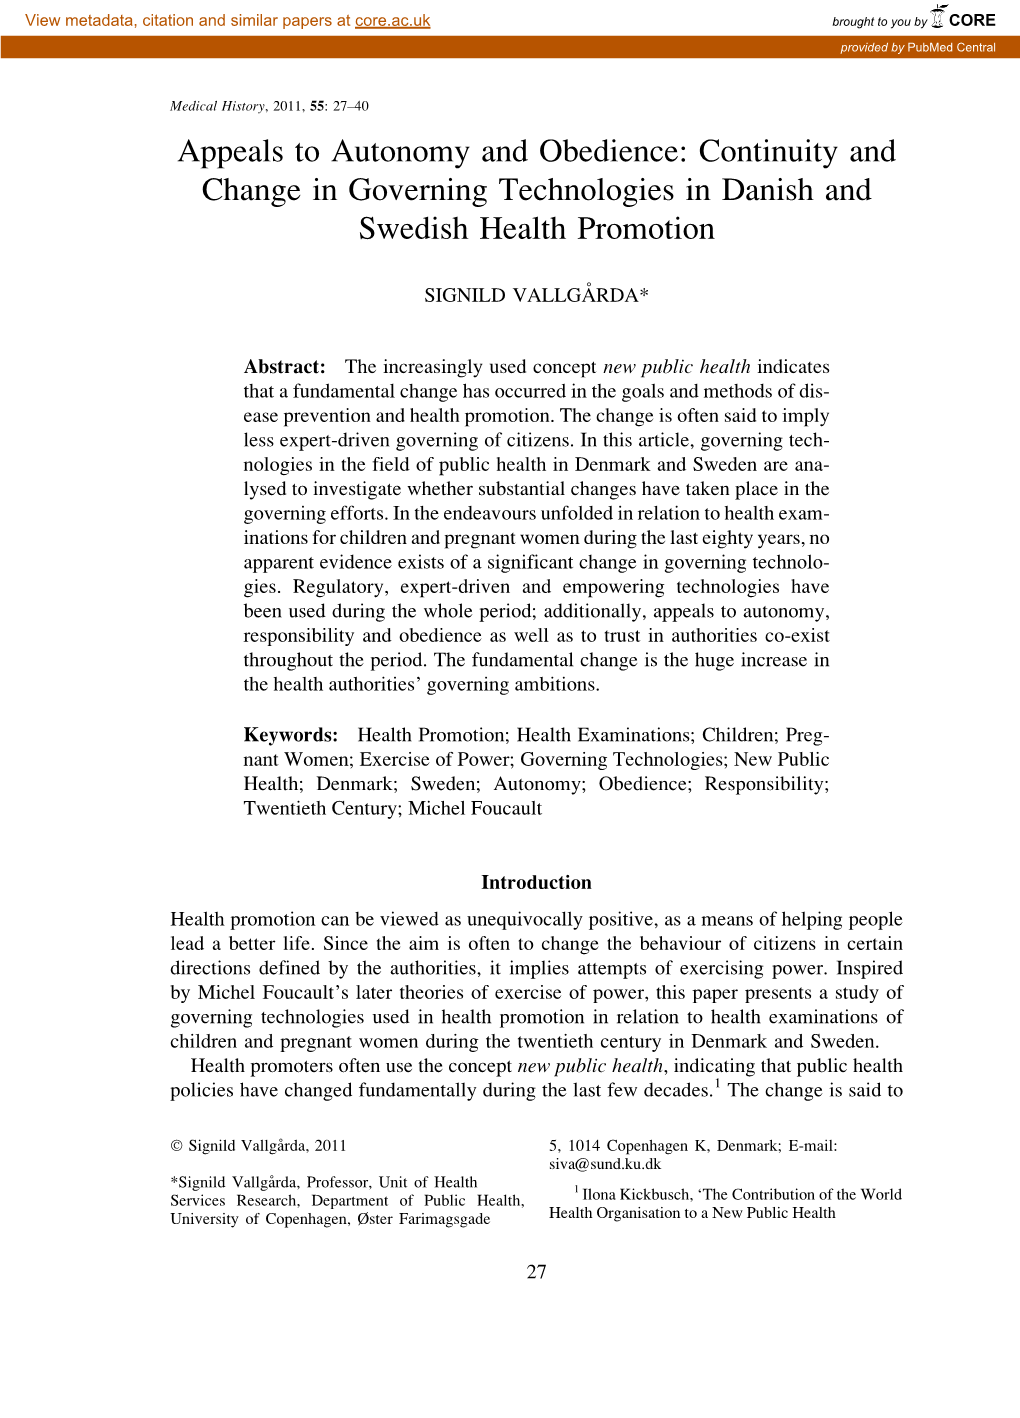 Appeals to Autonomy and Obedience: Continuity and Change in Governing Technologies in Danish and Swedish Health Promotion